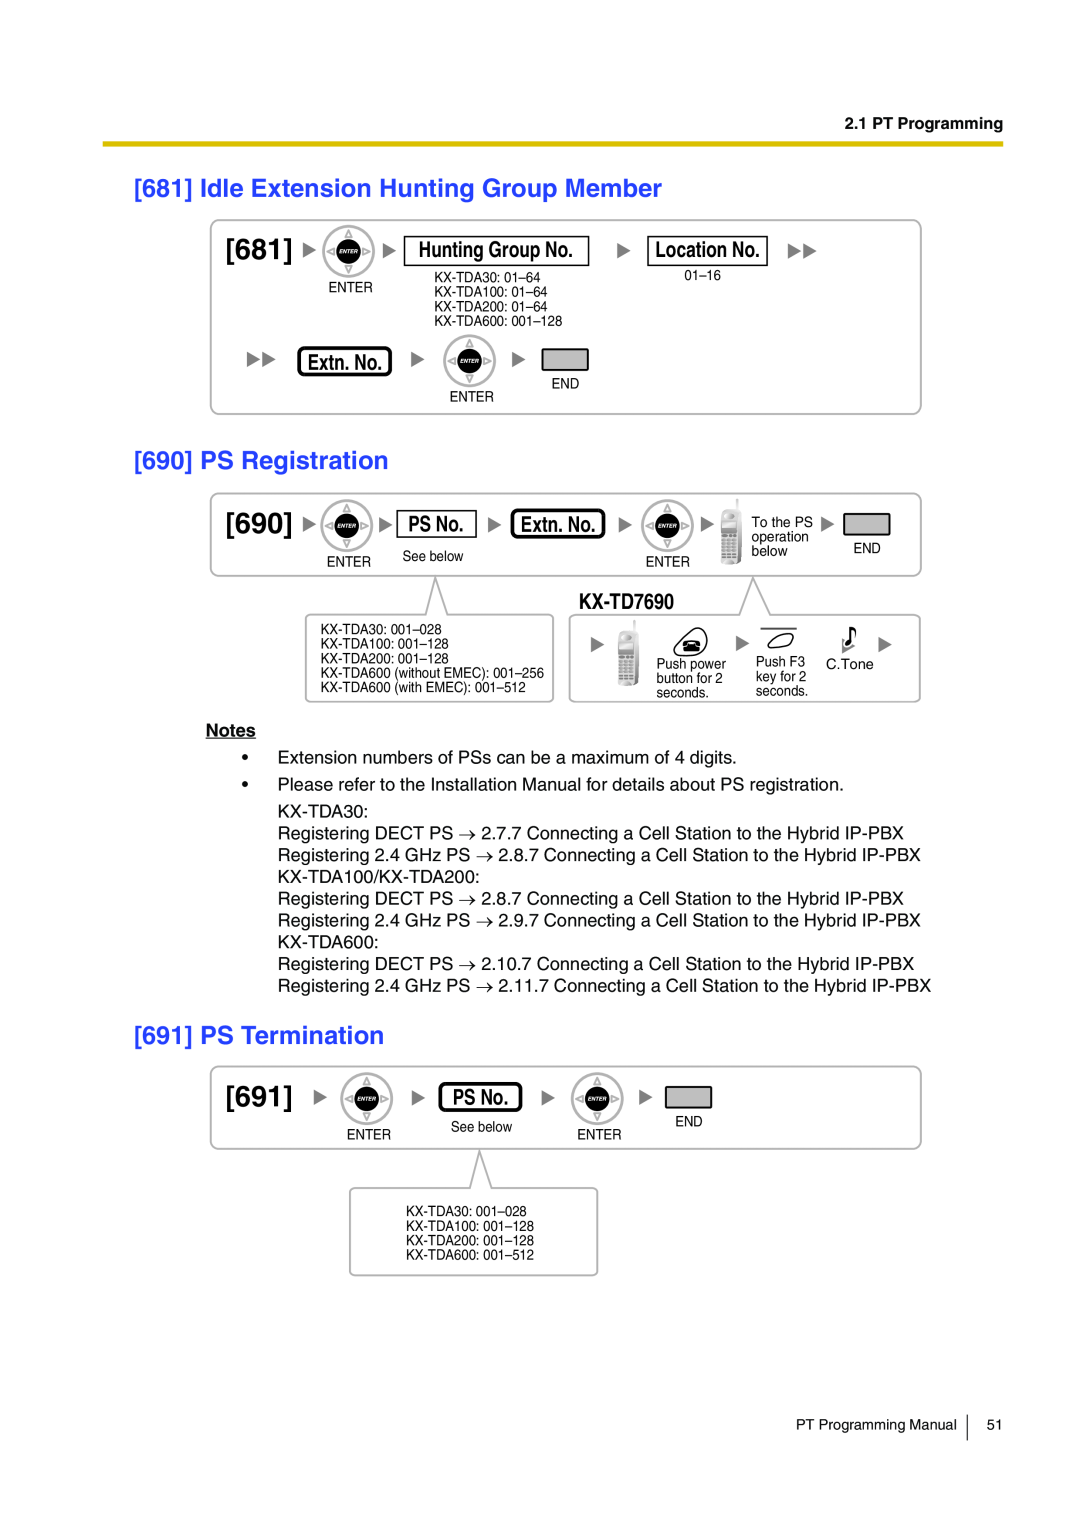 Panasonic KX-TDA200 manual Idle Extension Hunting Group Member, PS Registration, PS Termination, See below 